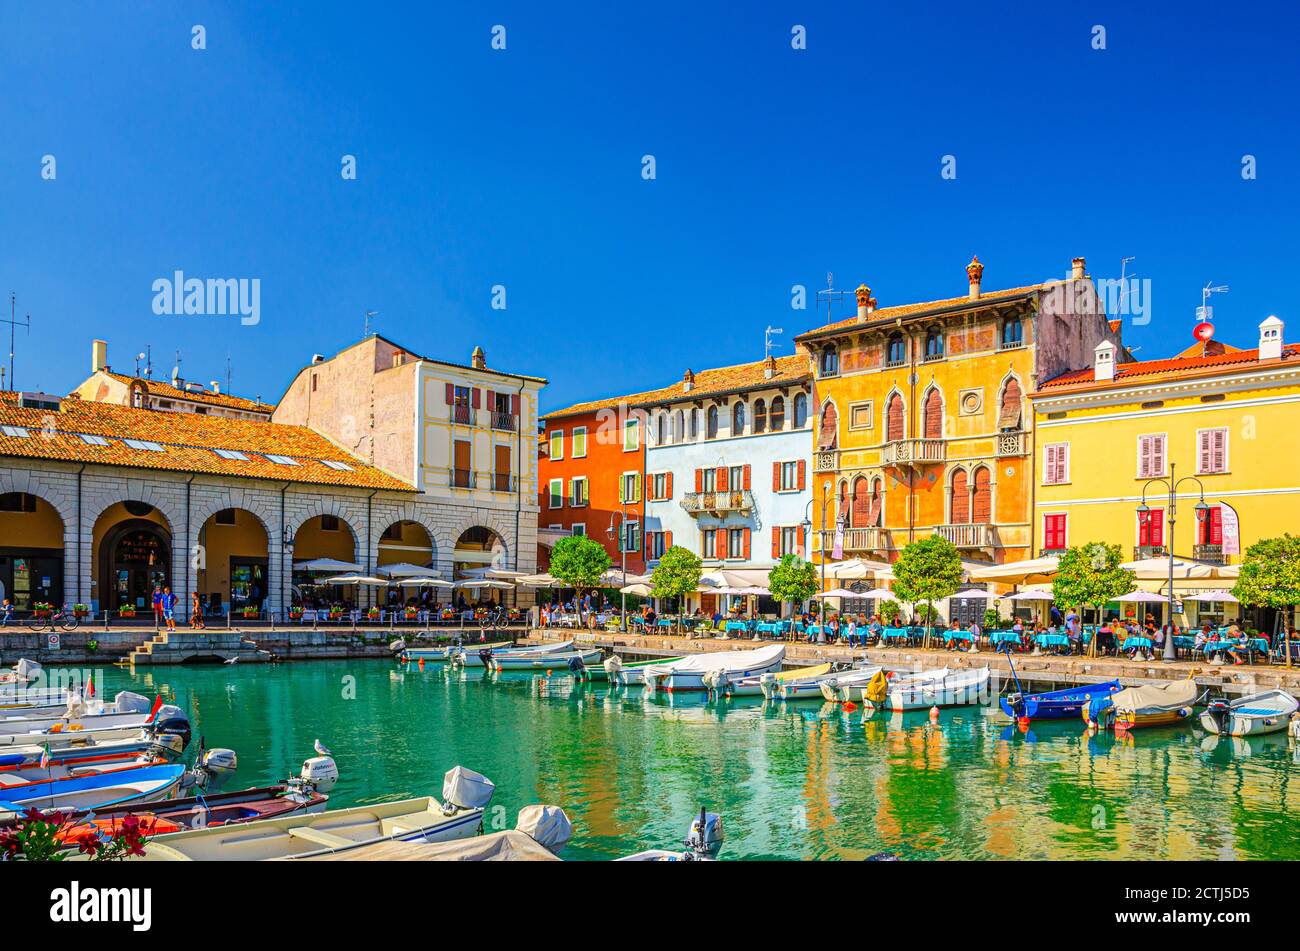 Desenzano del Garda, Italy, September 11, 2019: Old harbour Porto Vecchio with boats on turquoise water, green trees, street restaurants and traditional buildings in historical town centre, Lombardy Stock Photo